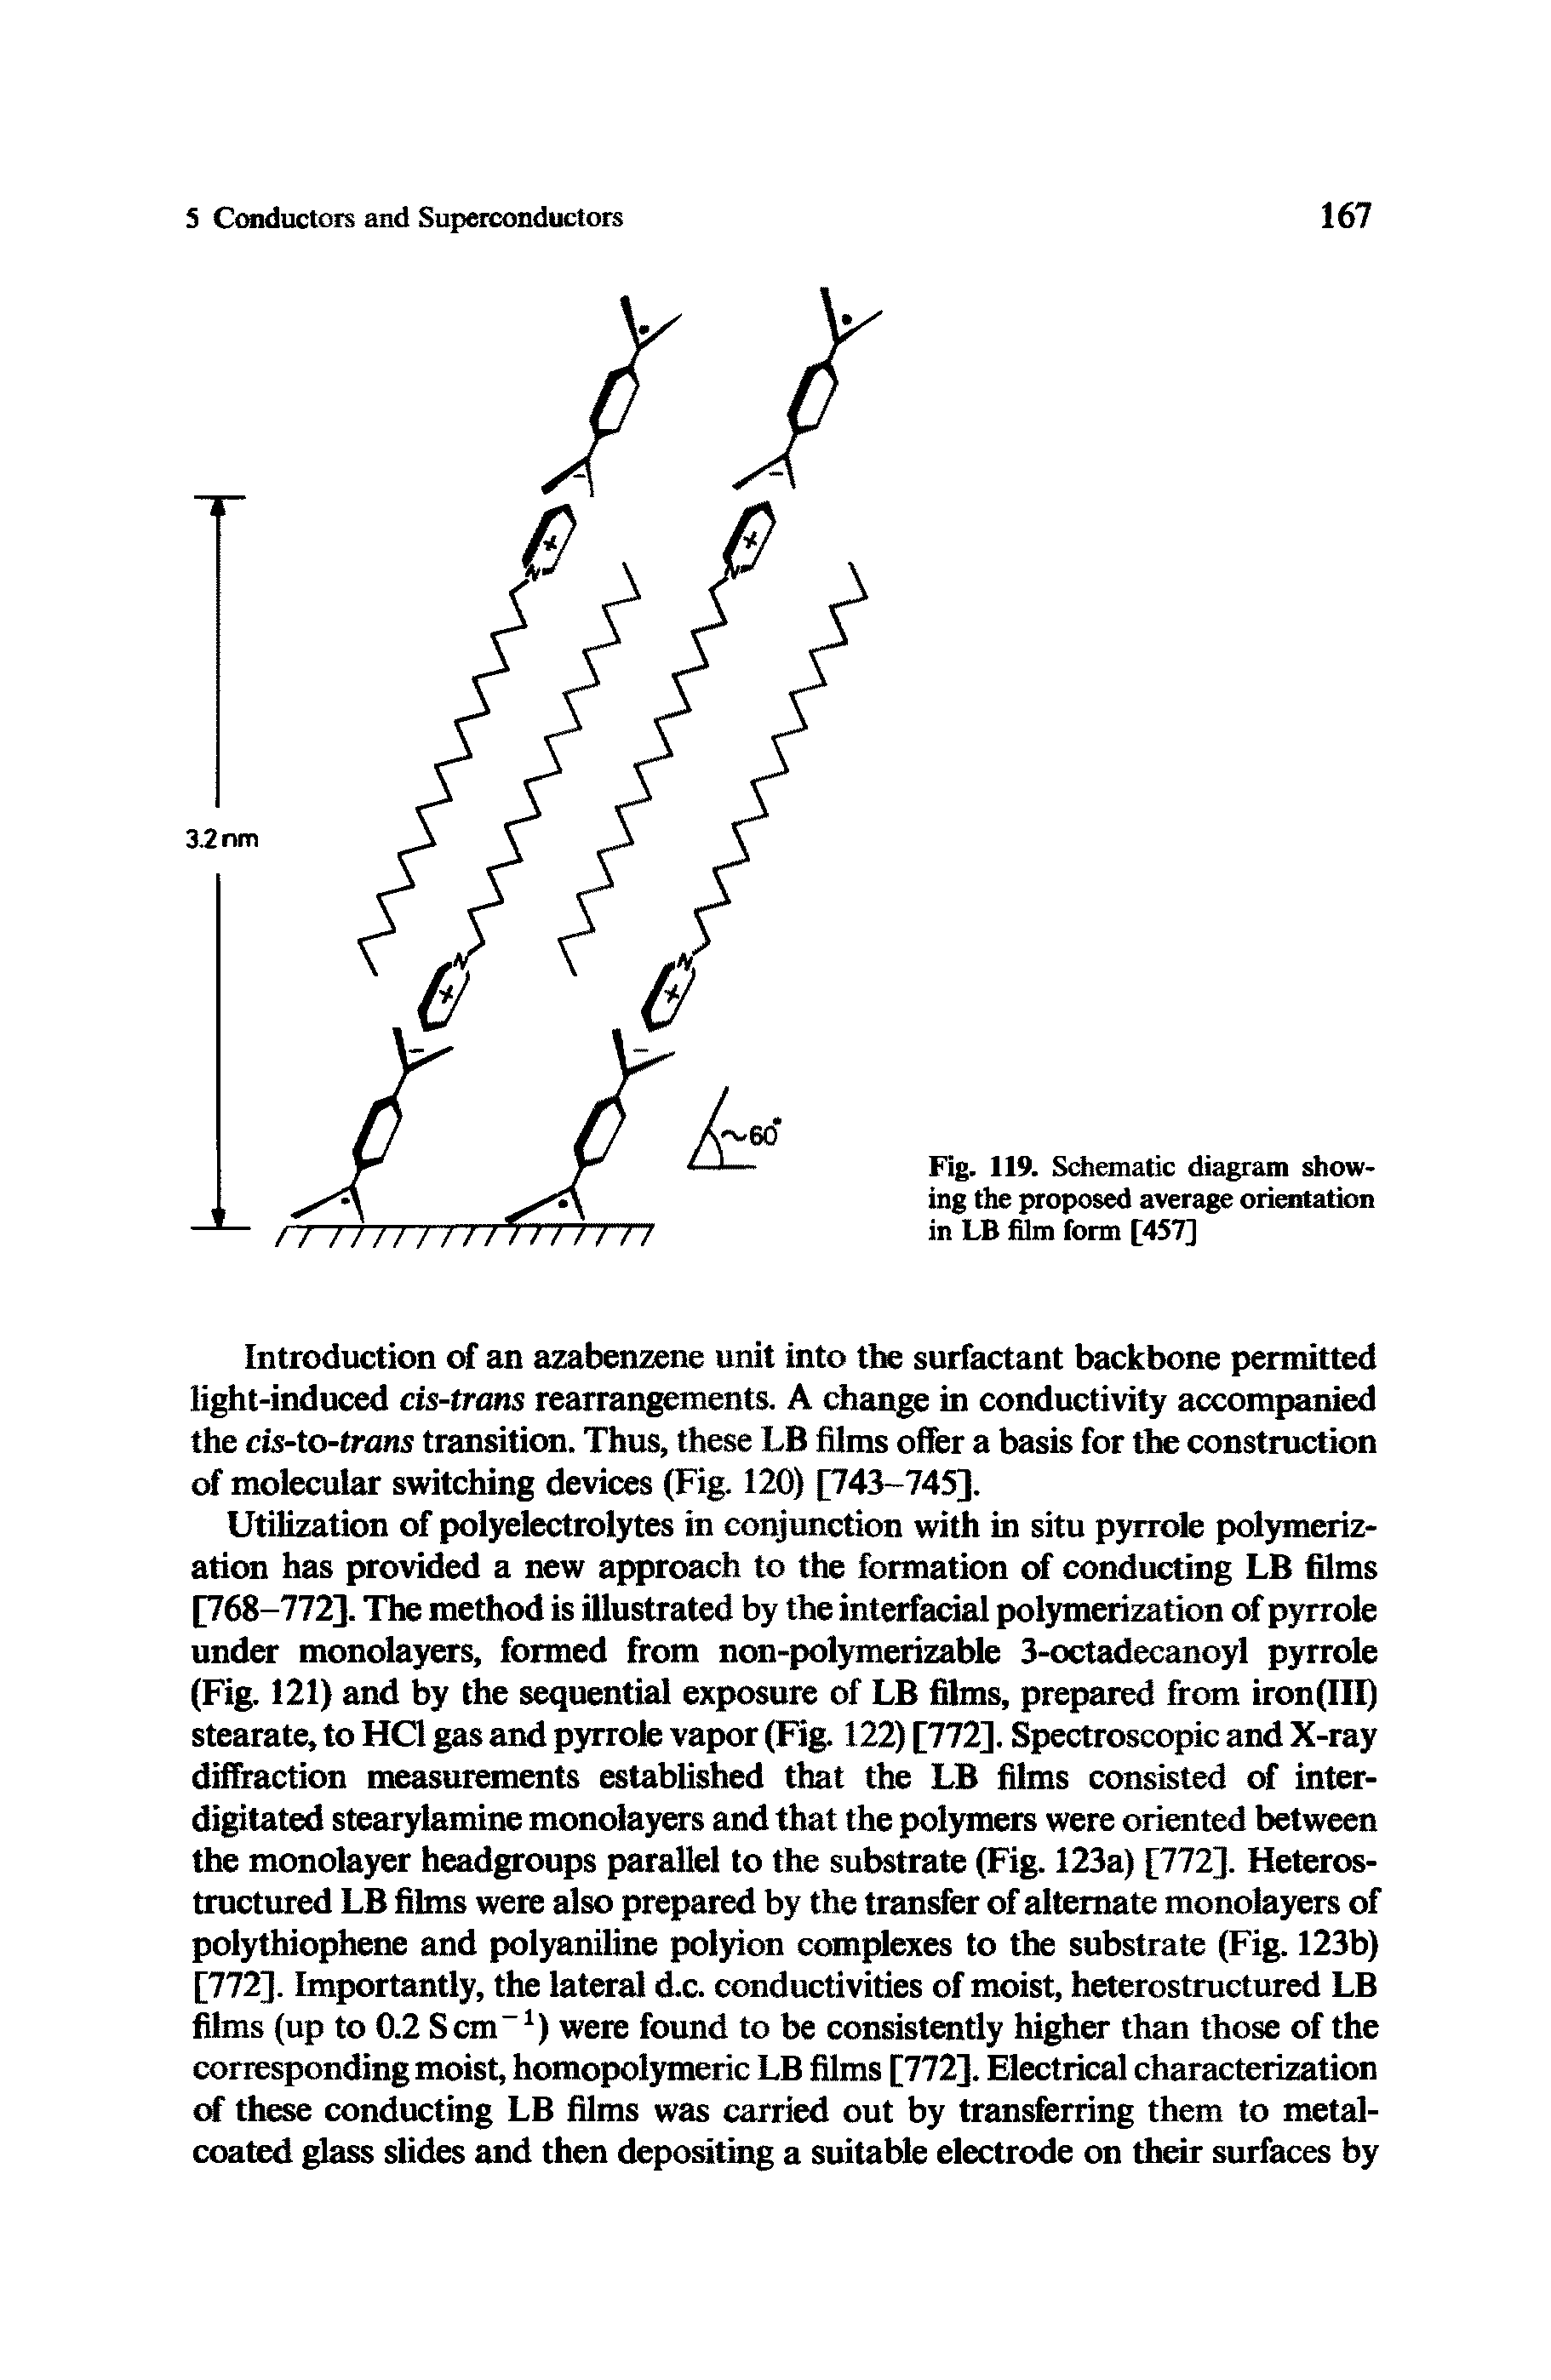 Fig. 119. Schematic diagram showing the proposed average orientation in LB film form [457]...